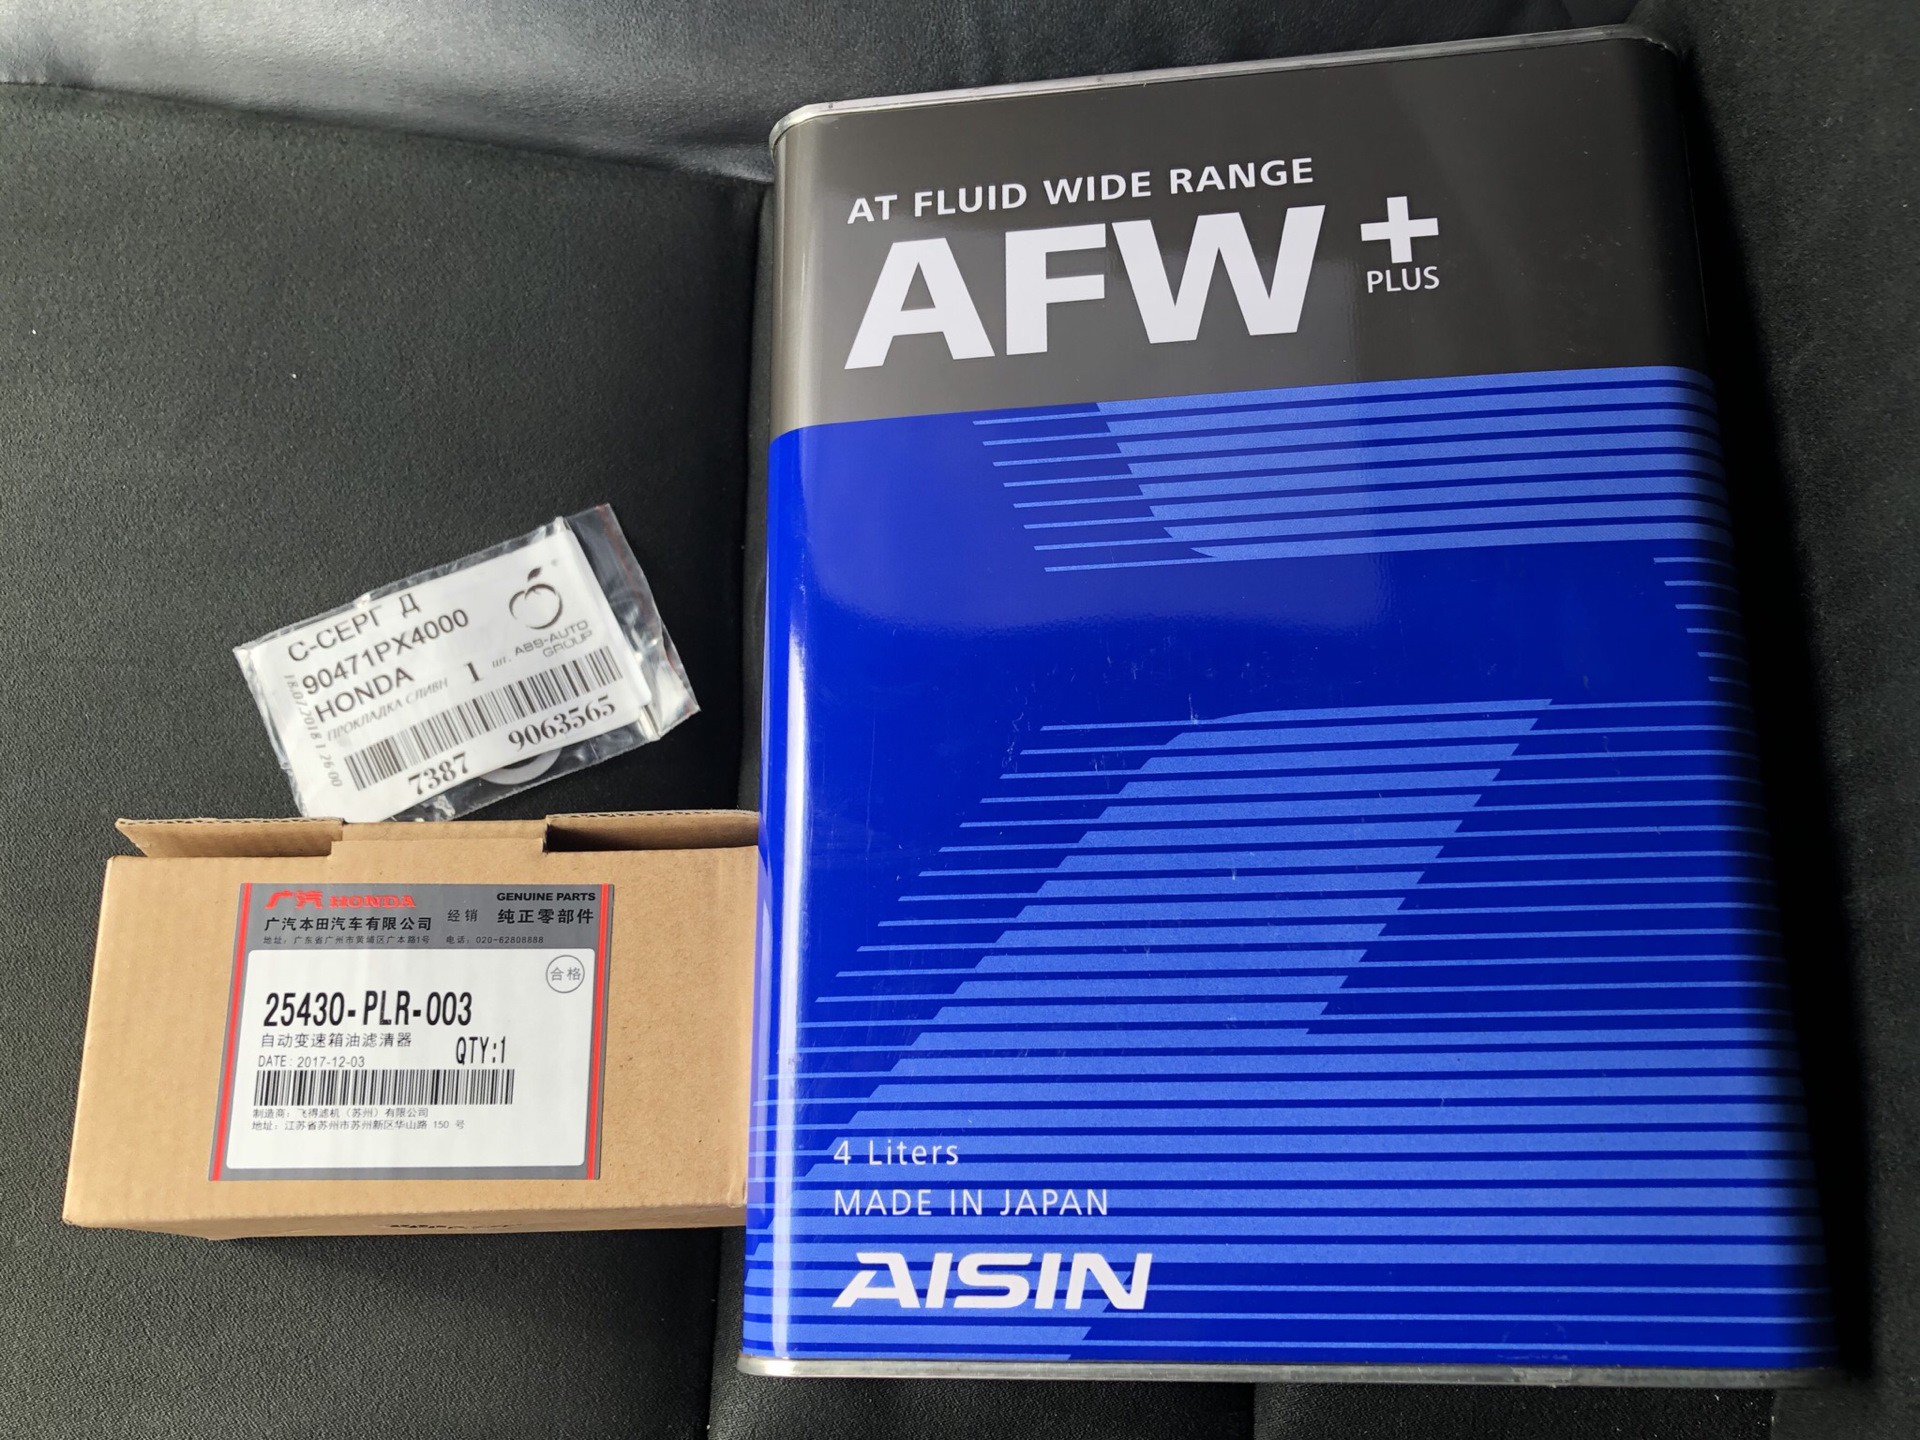 Atf afw. Atf6004 AISIN. ATF AISIN AFW+4 L. Масло АКПП Айсин AFW+. ATF wide range AFW+ 4л.